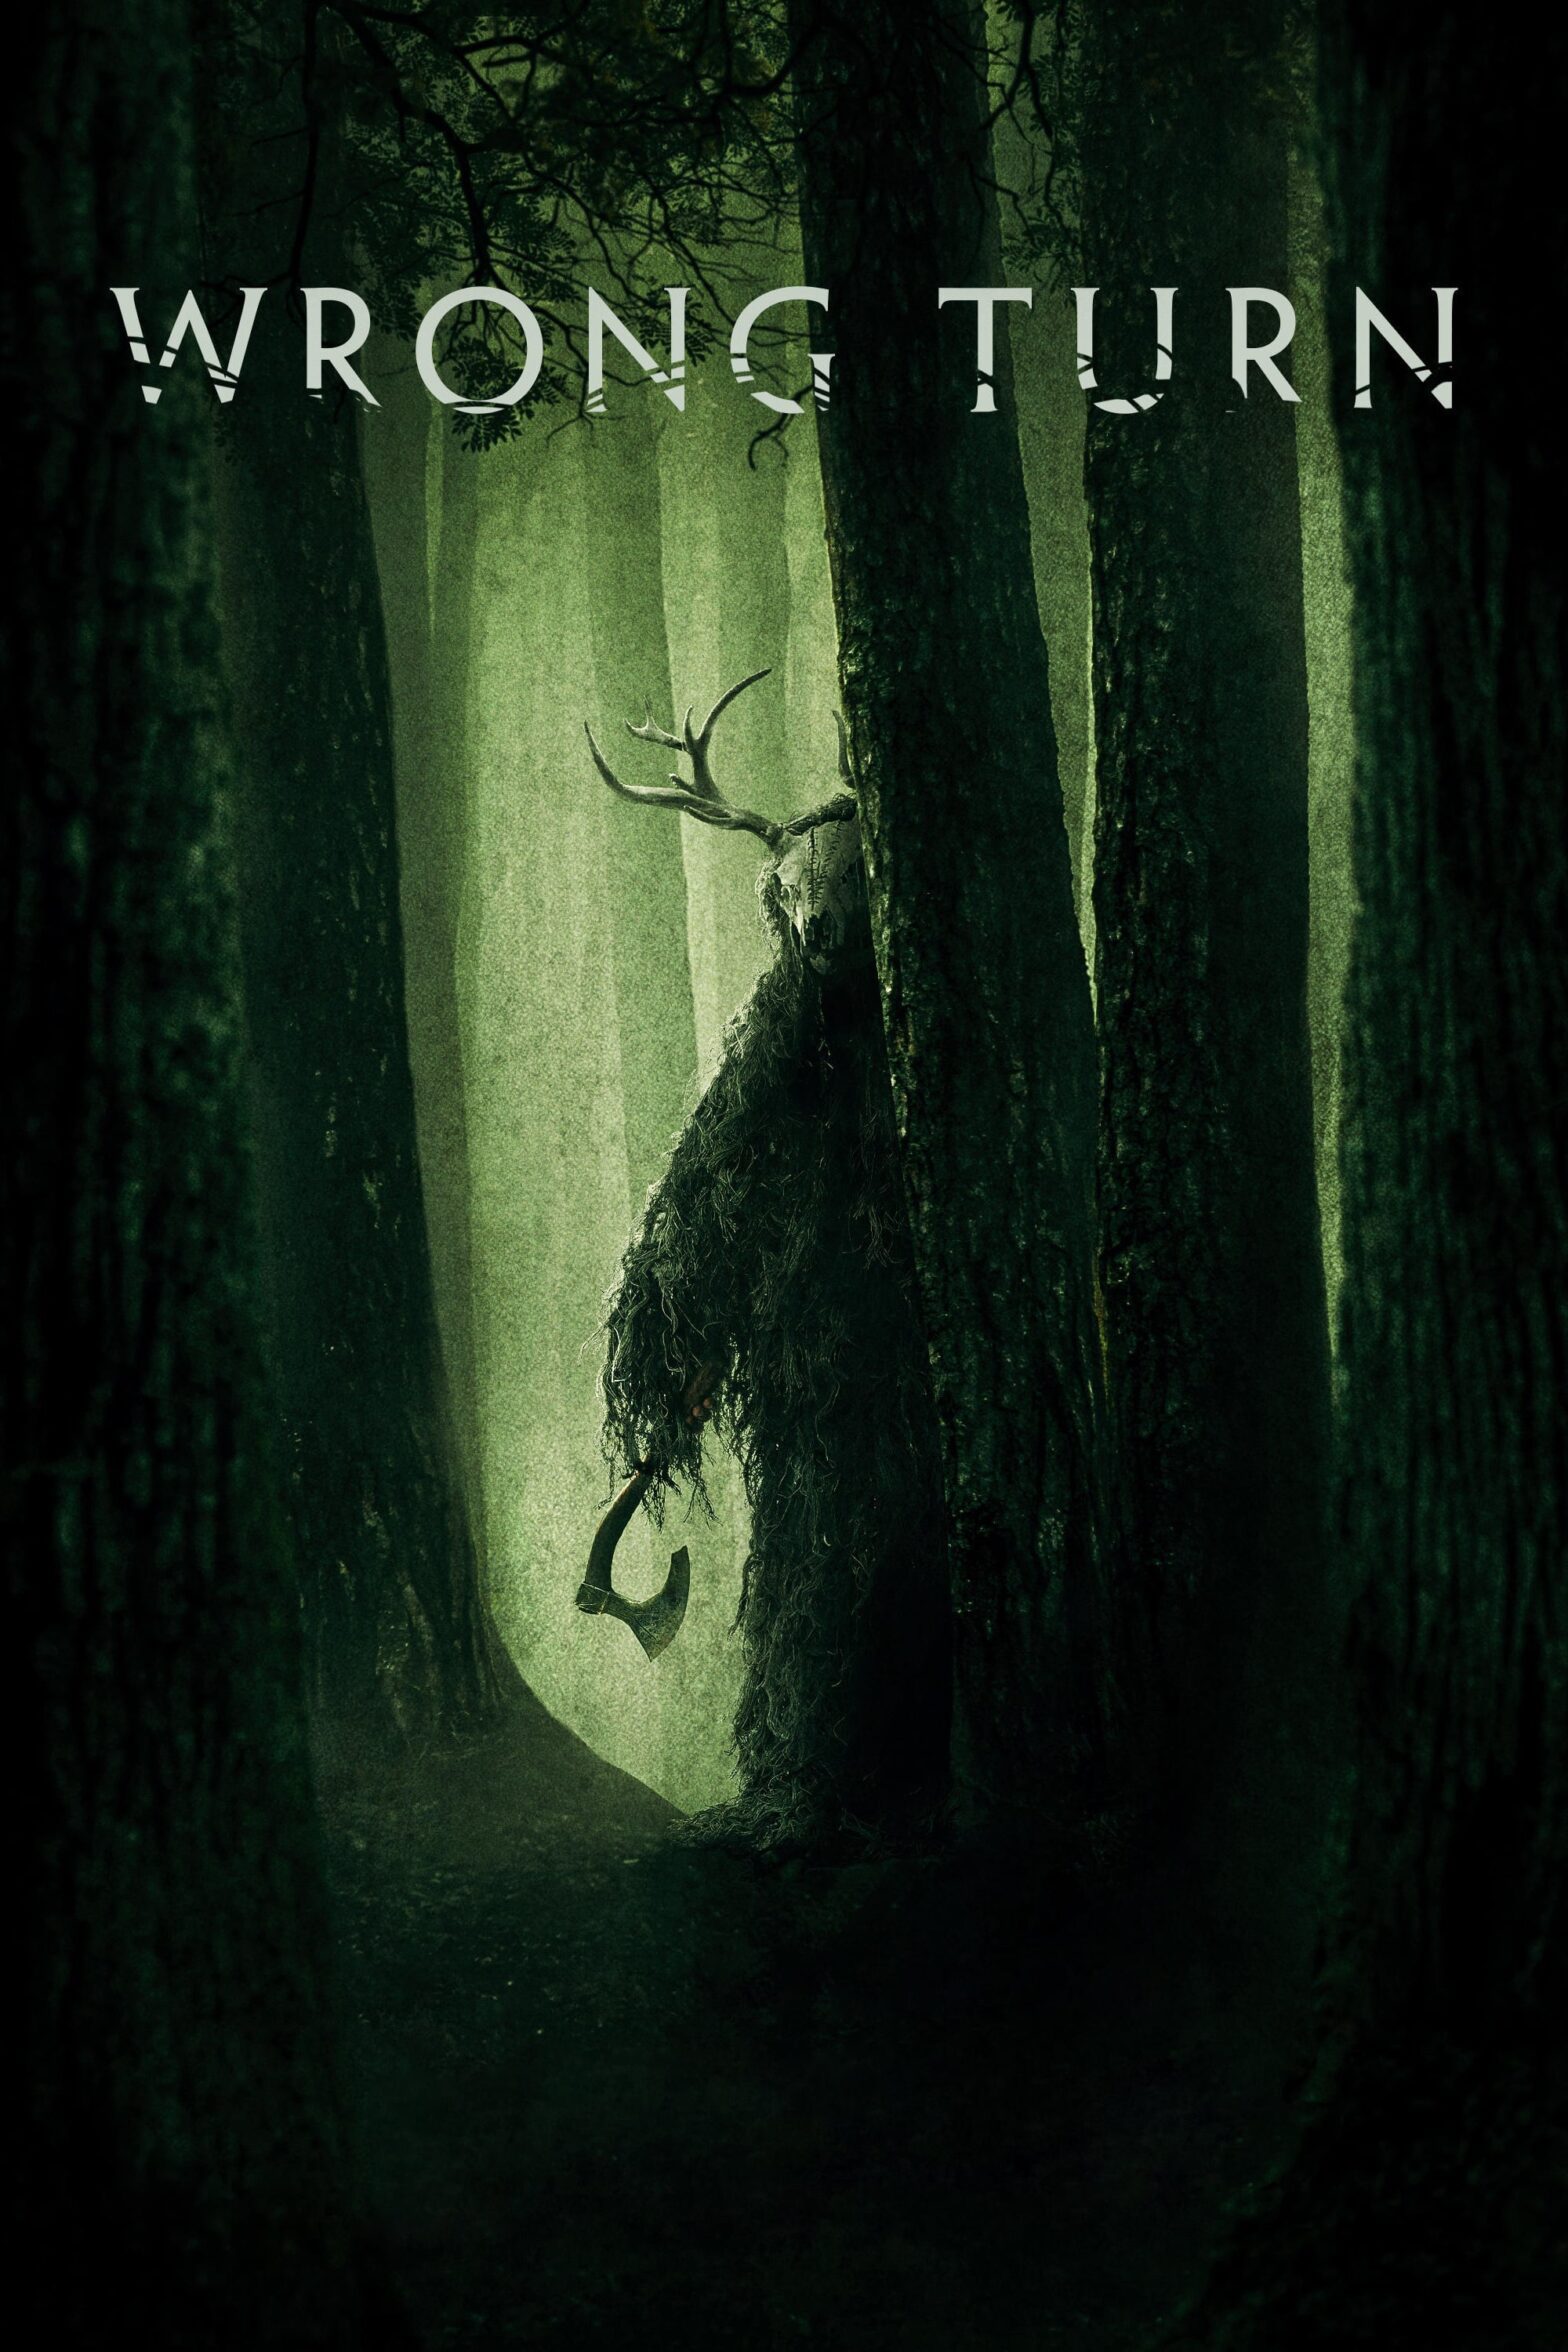 Poster for the movie "Wrong Turn"